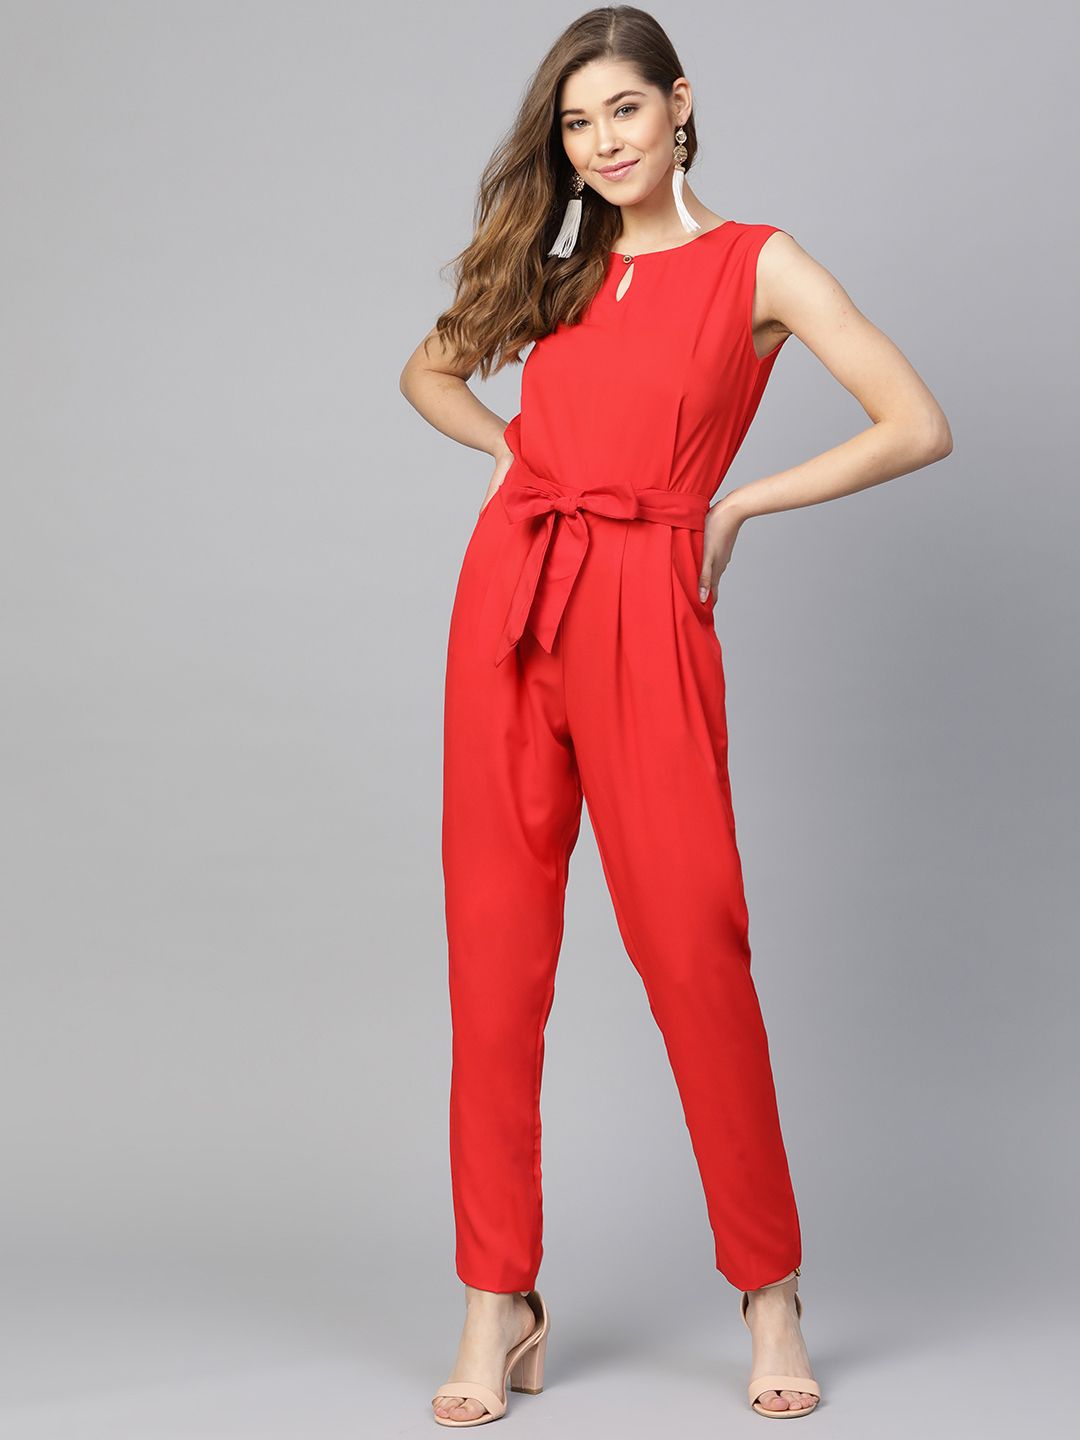 Uptownie Lite Women Red Solid Basic Jumpsuit with Belt Price in India